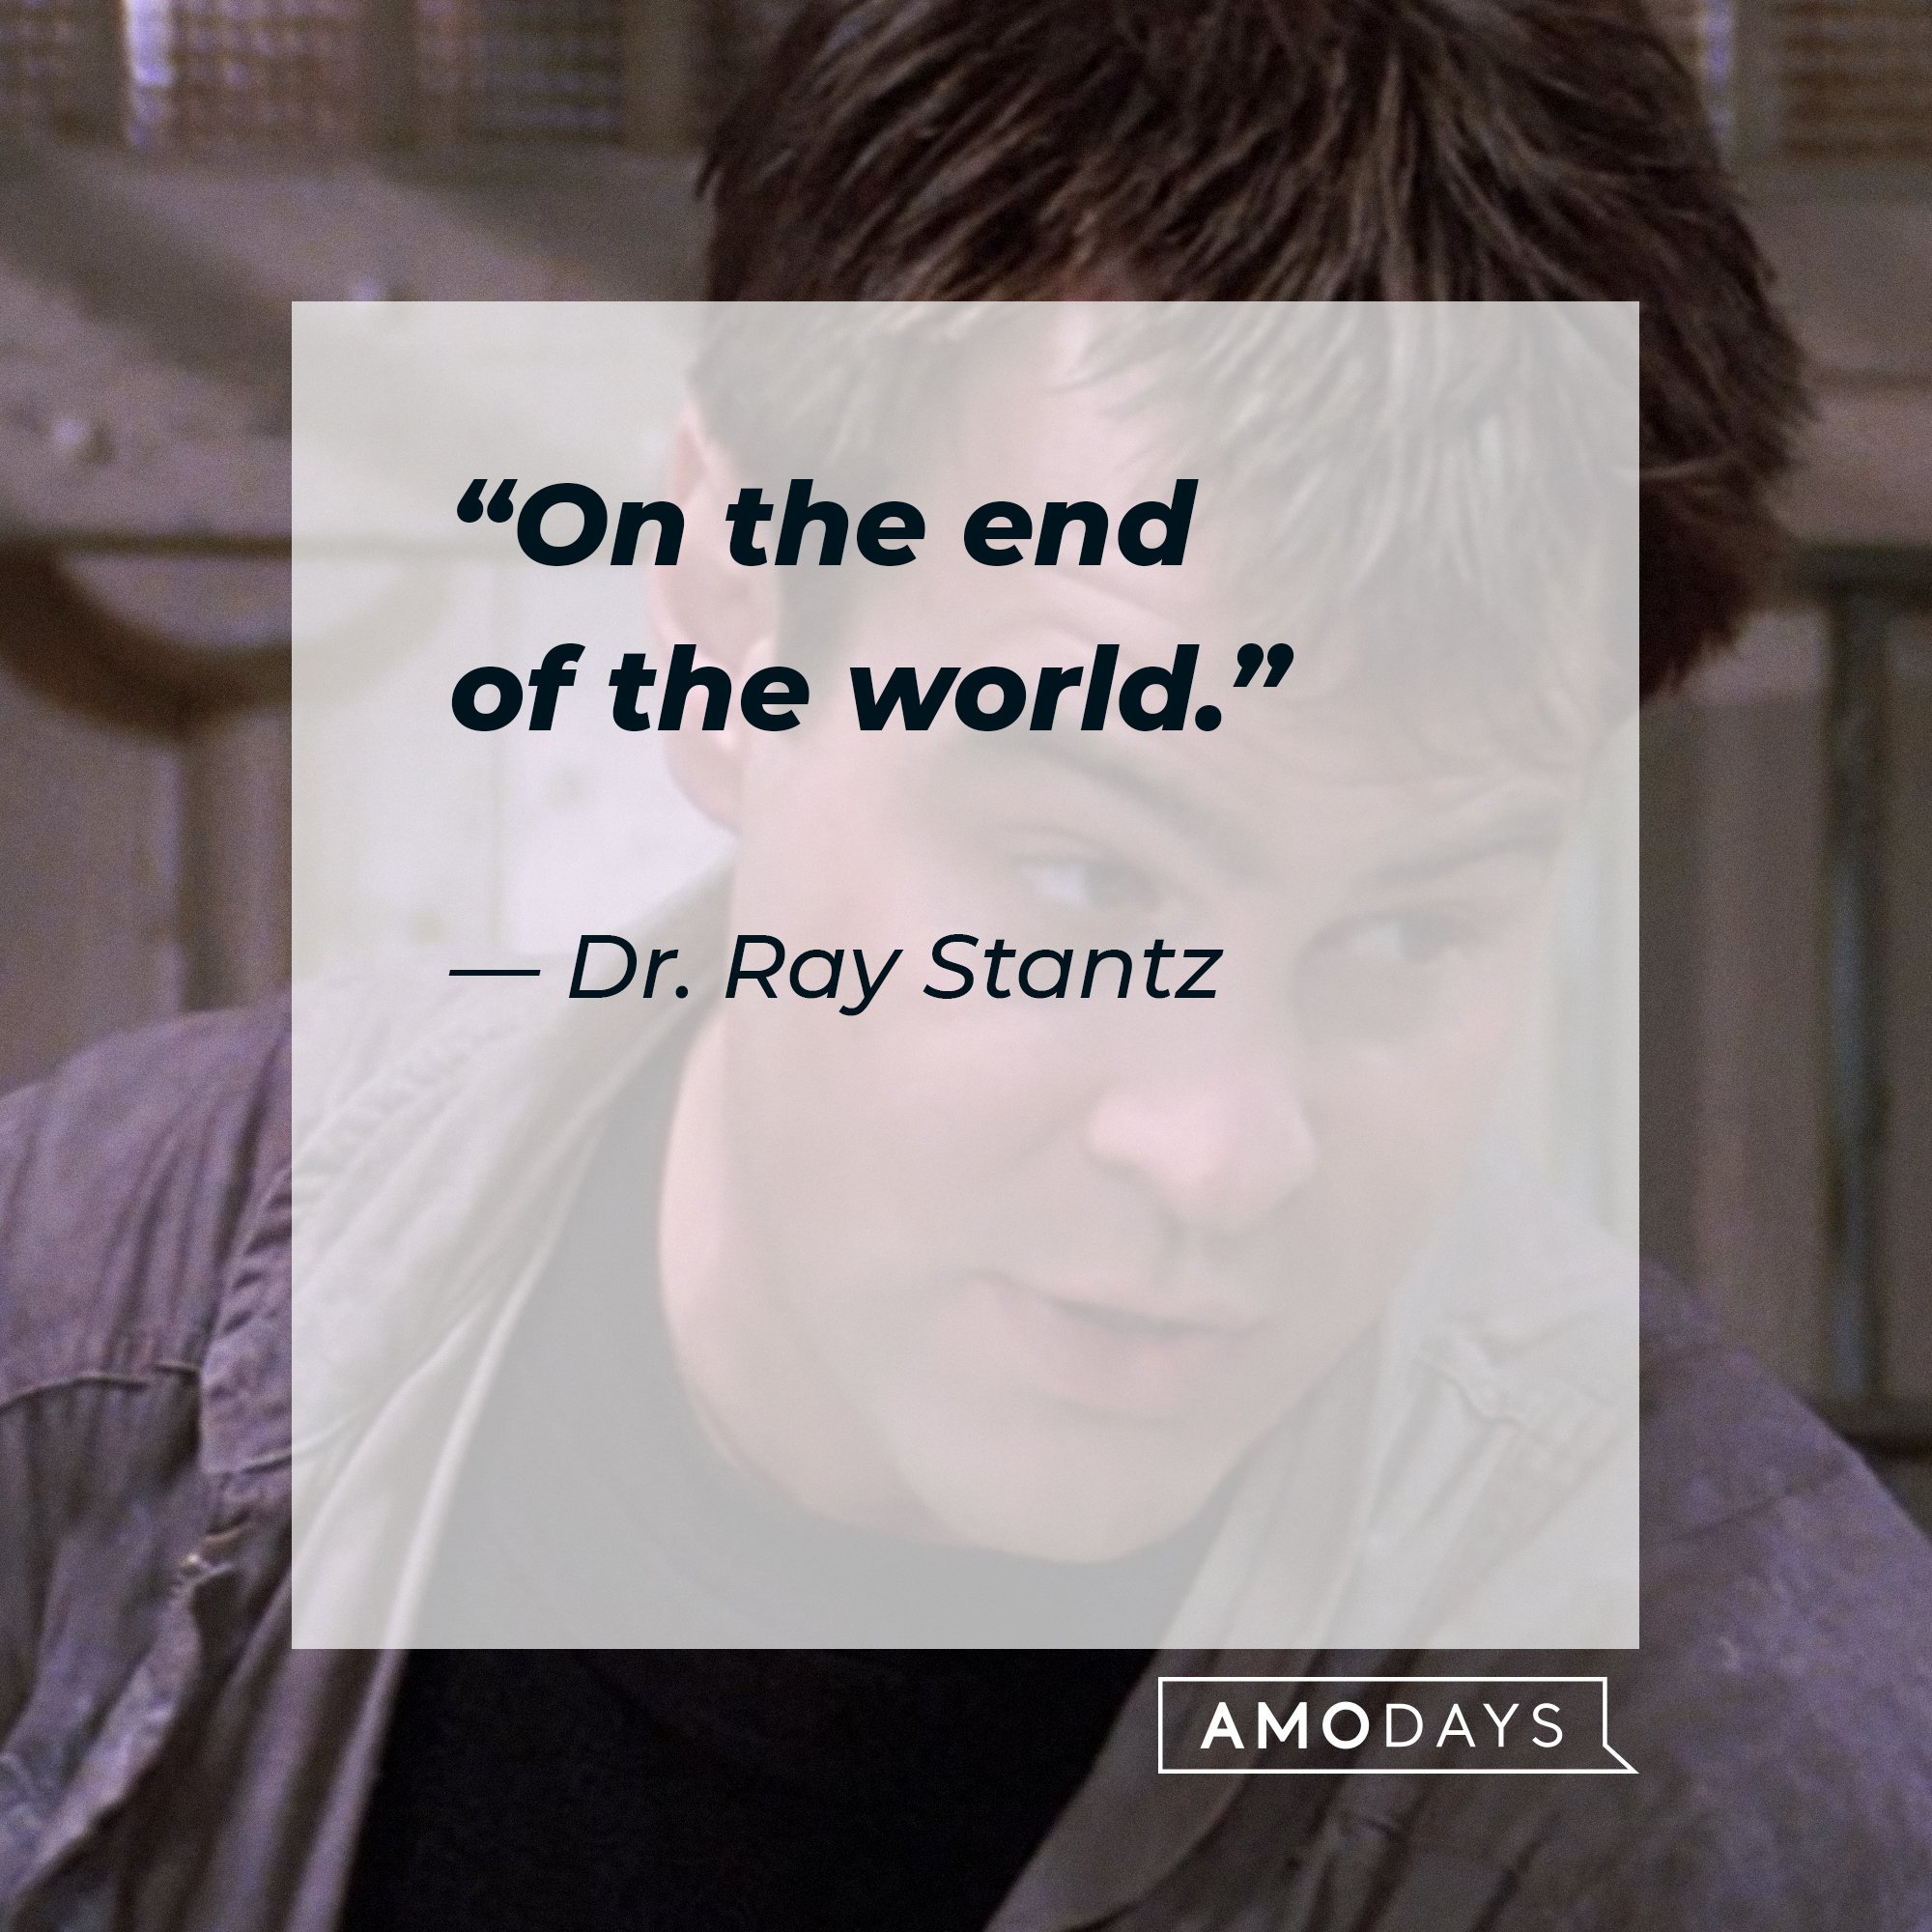  Dr. Ray Stantz's quote: “On the end of the world.” | Image: AmoDays